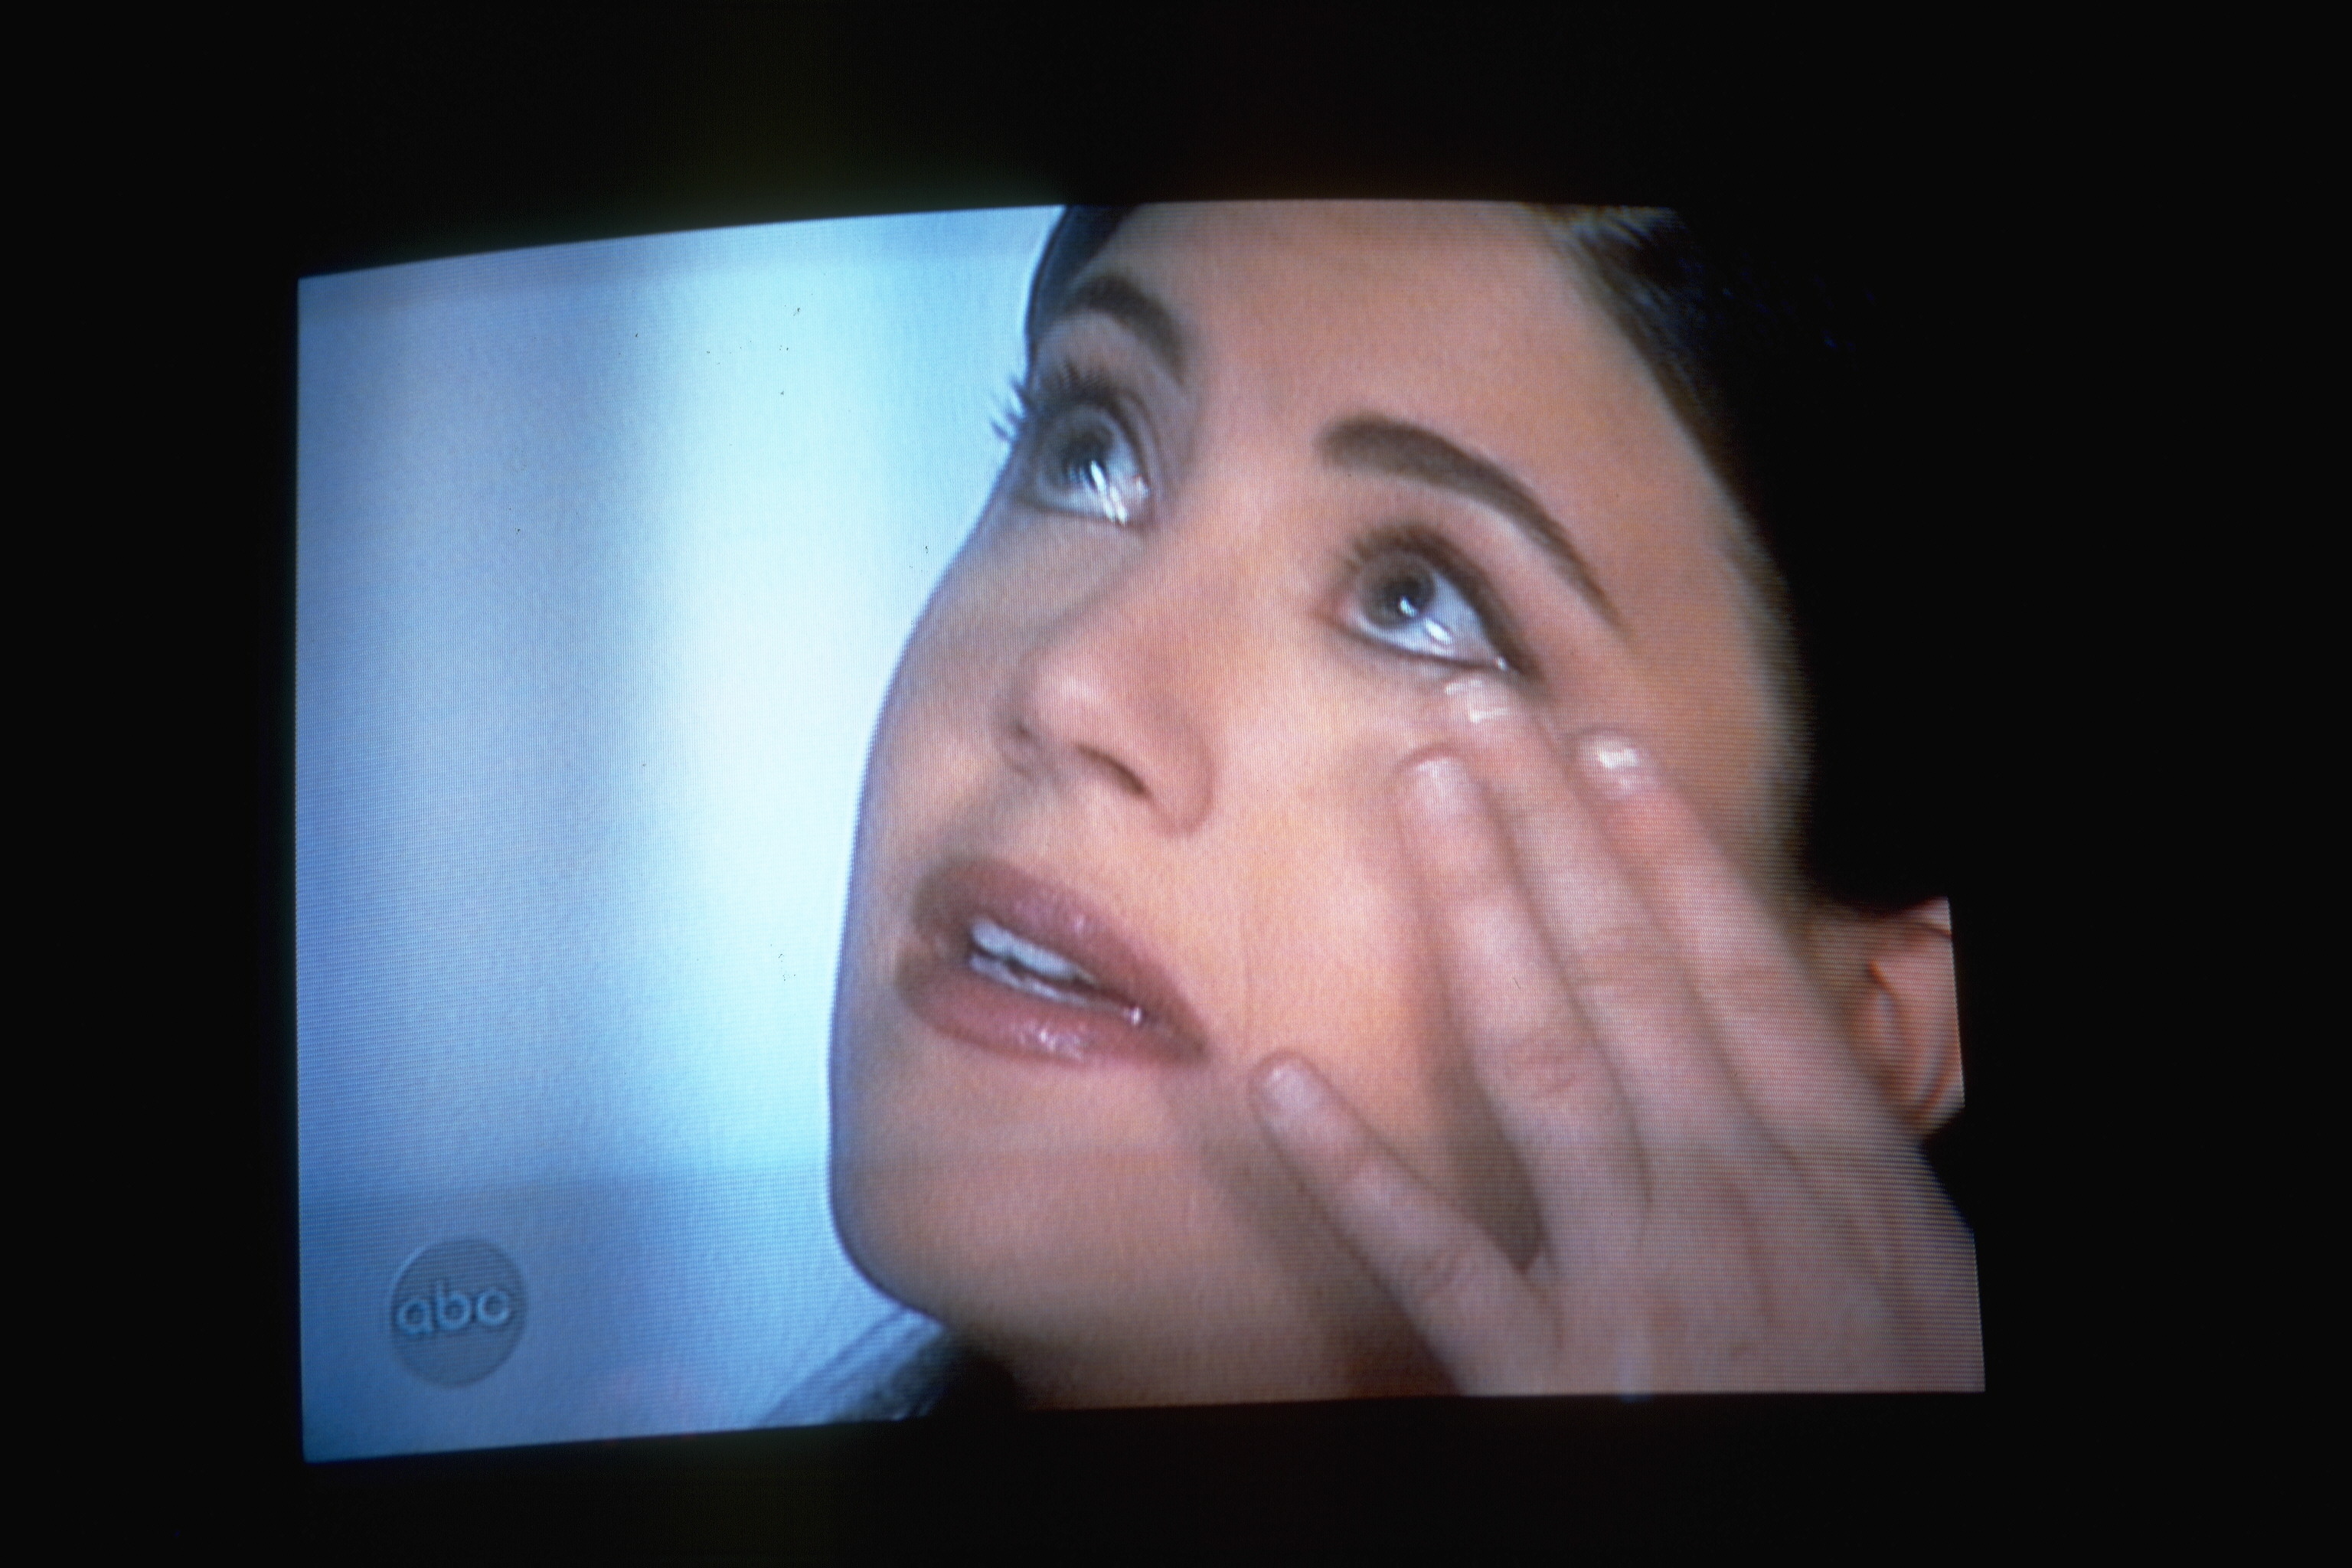 Monica Lewinsky getting emotional during a televised interview on March 3, 1999 | Source: Getty Images